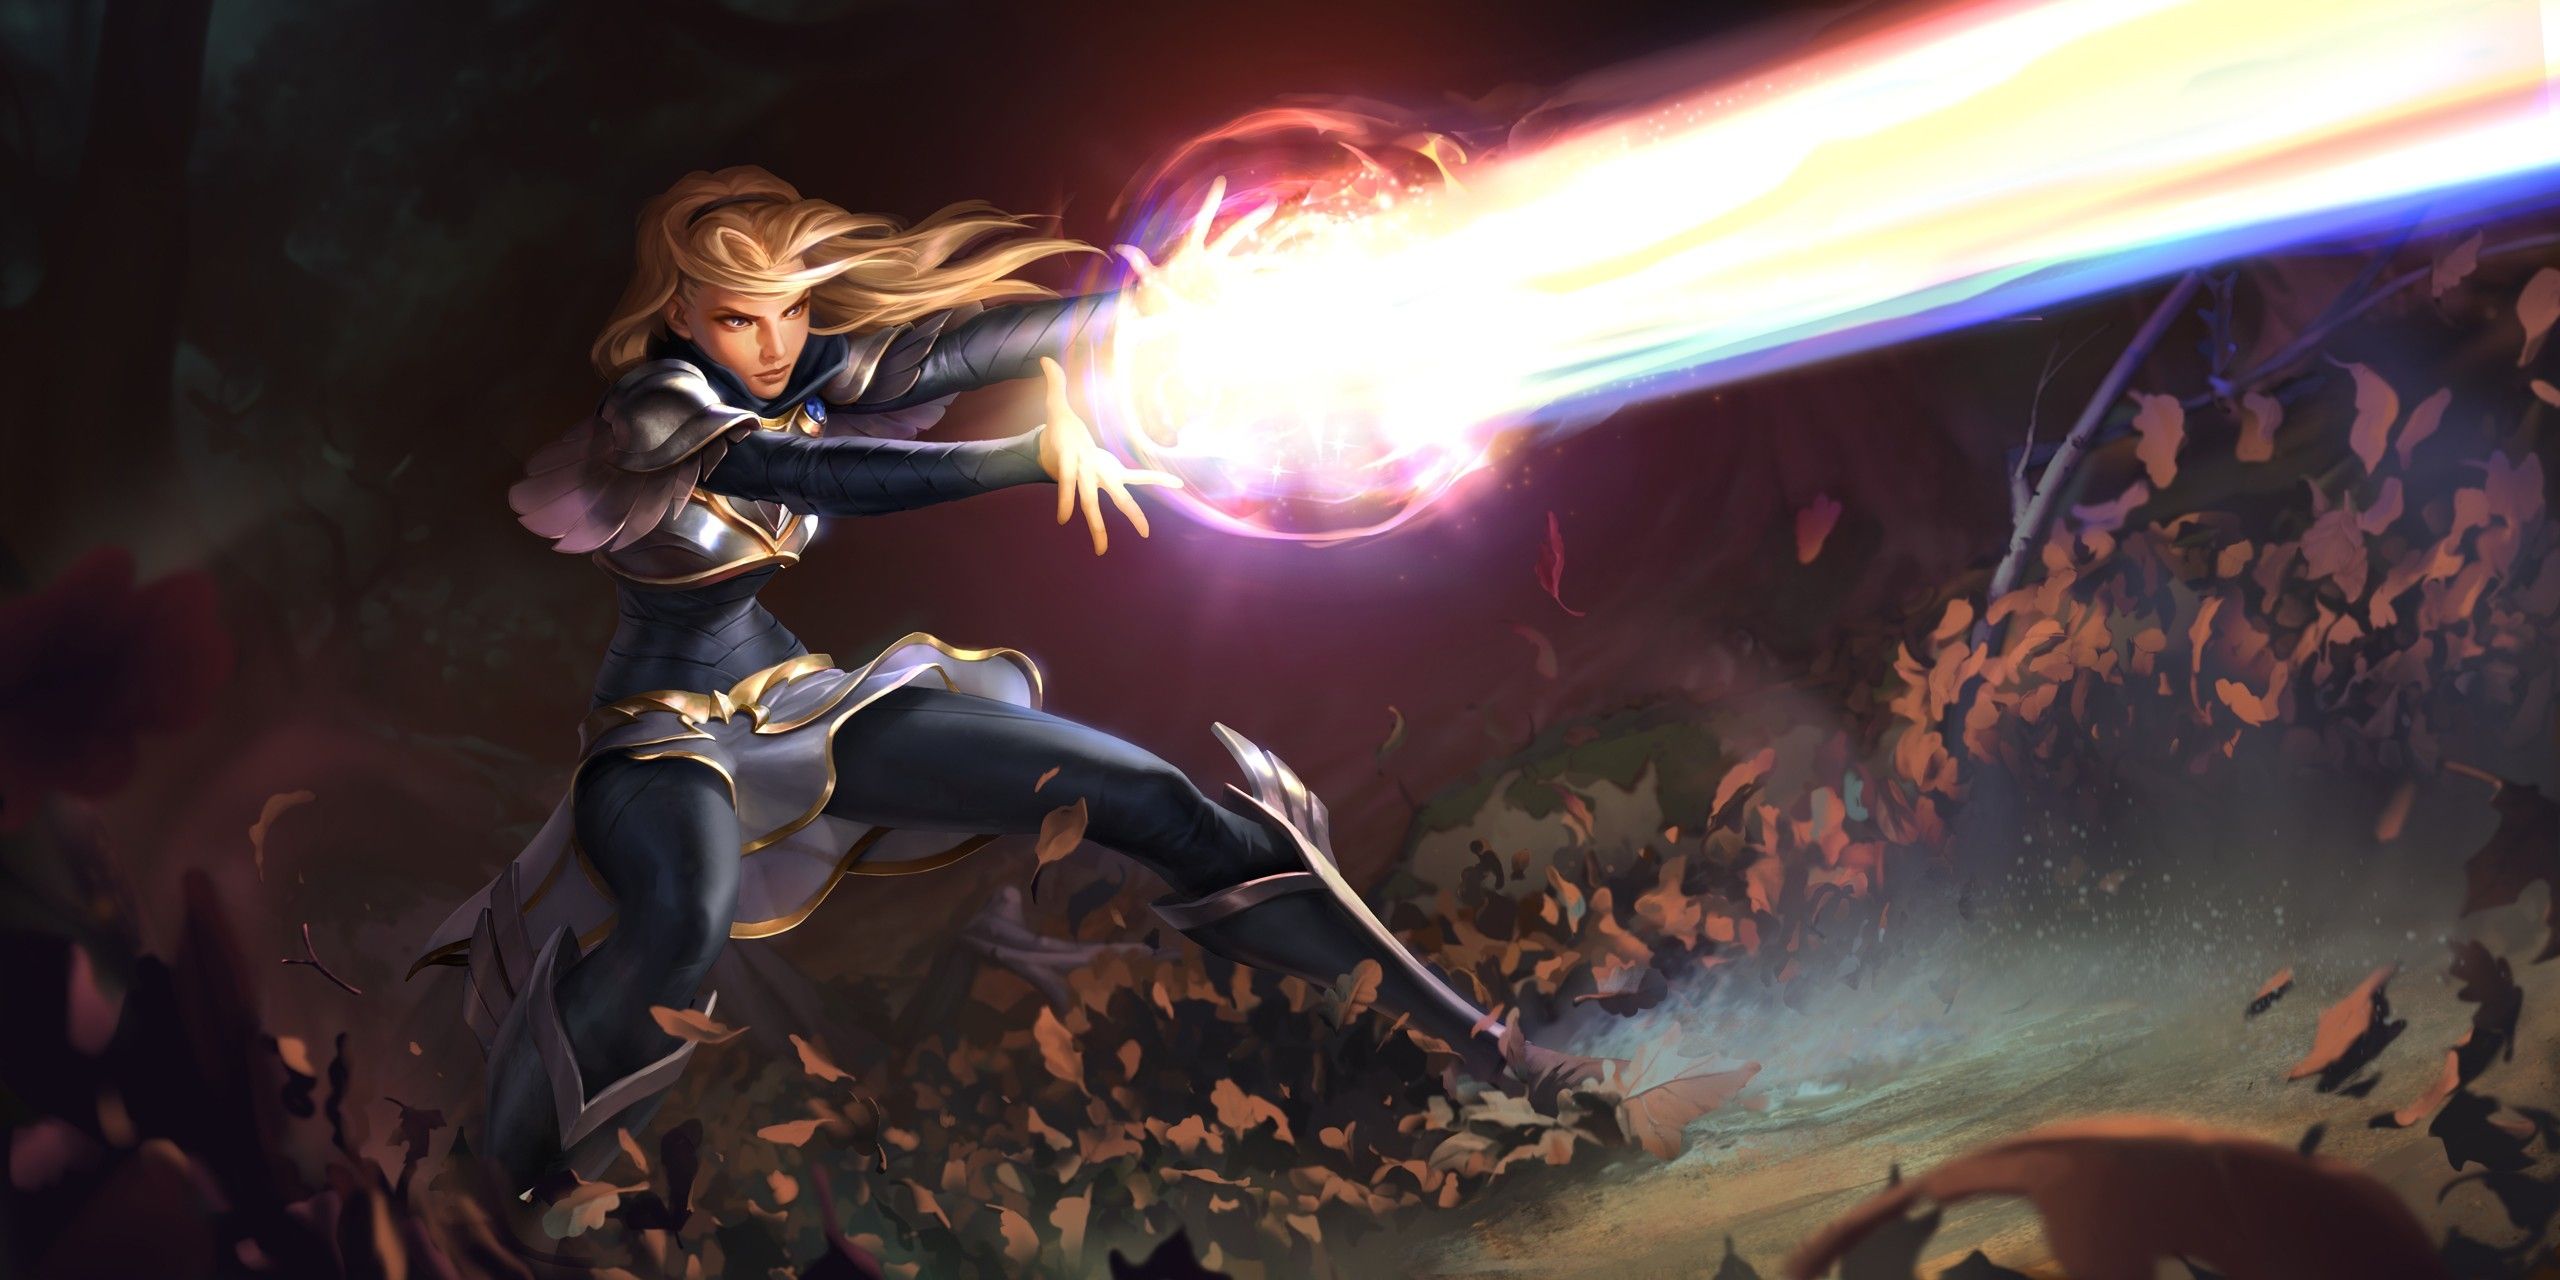 Lux in League Of Legends 1440x2880 Resolution Wallpaper, HD Games 4K Wallpaper, Image, Photo and Background